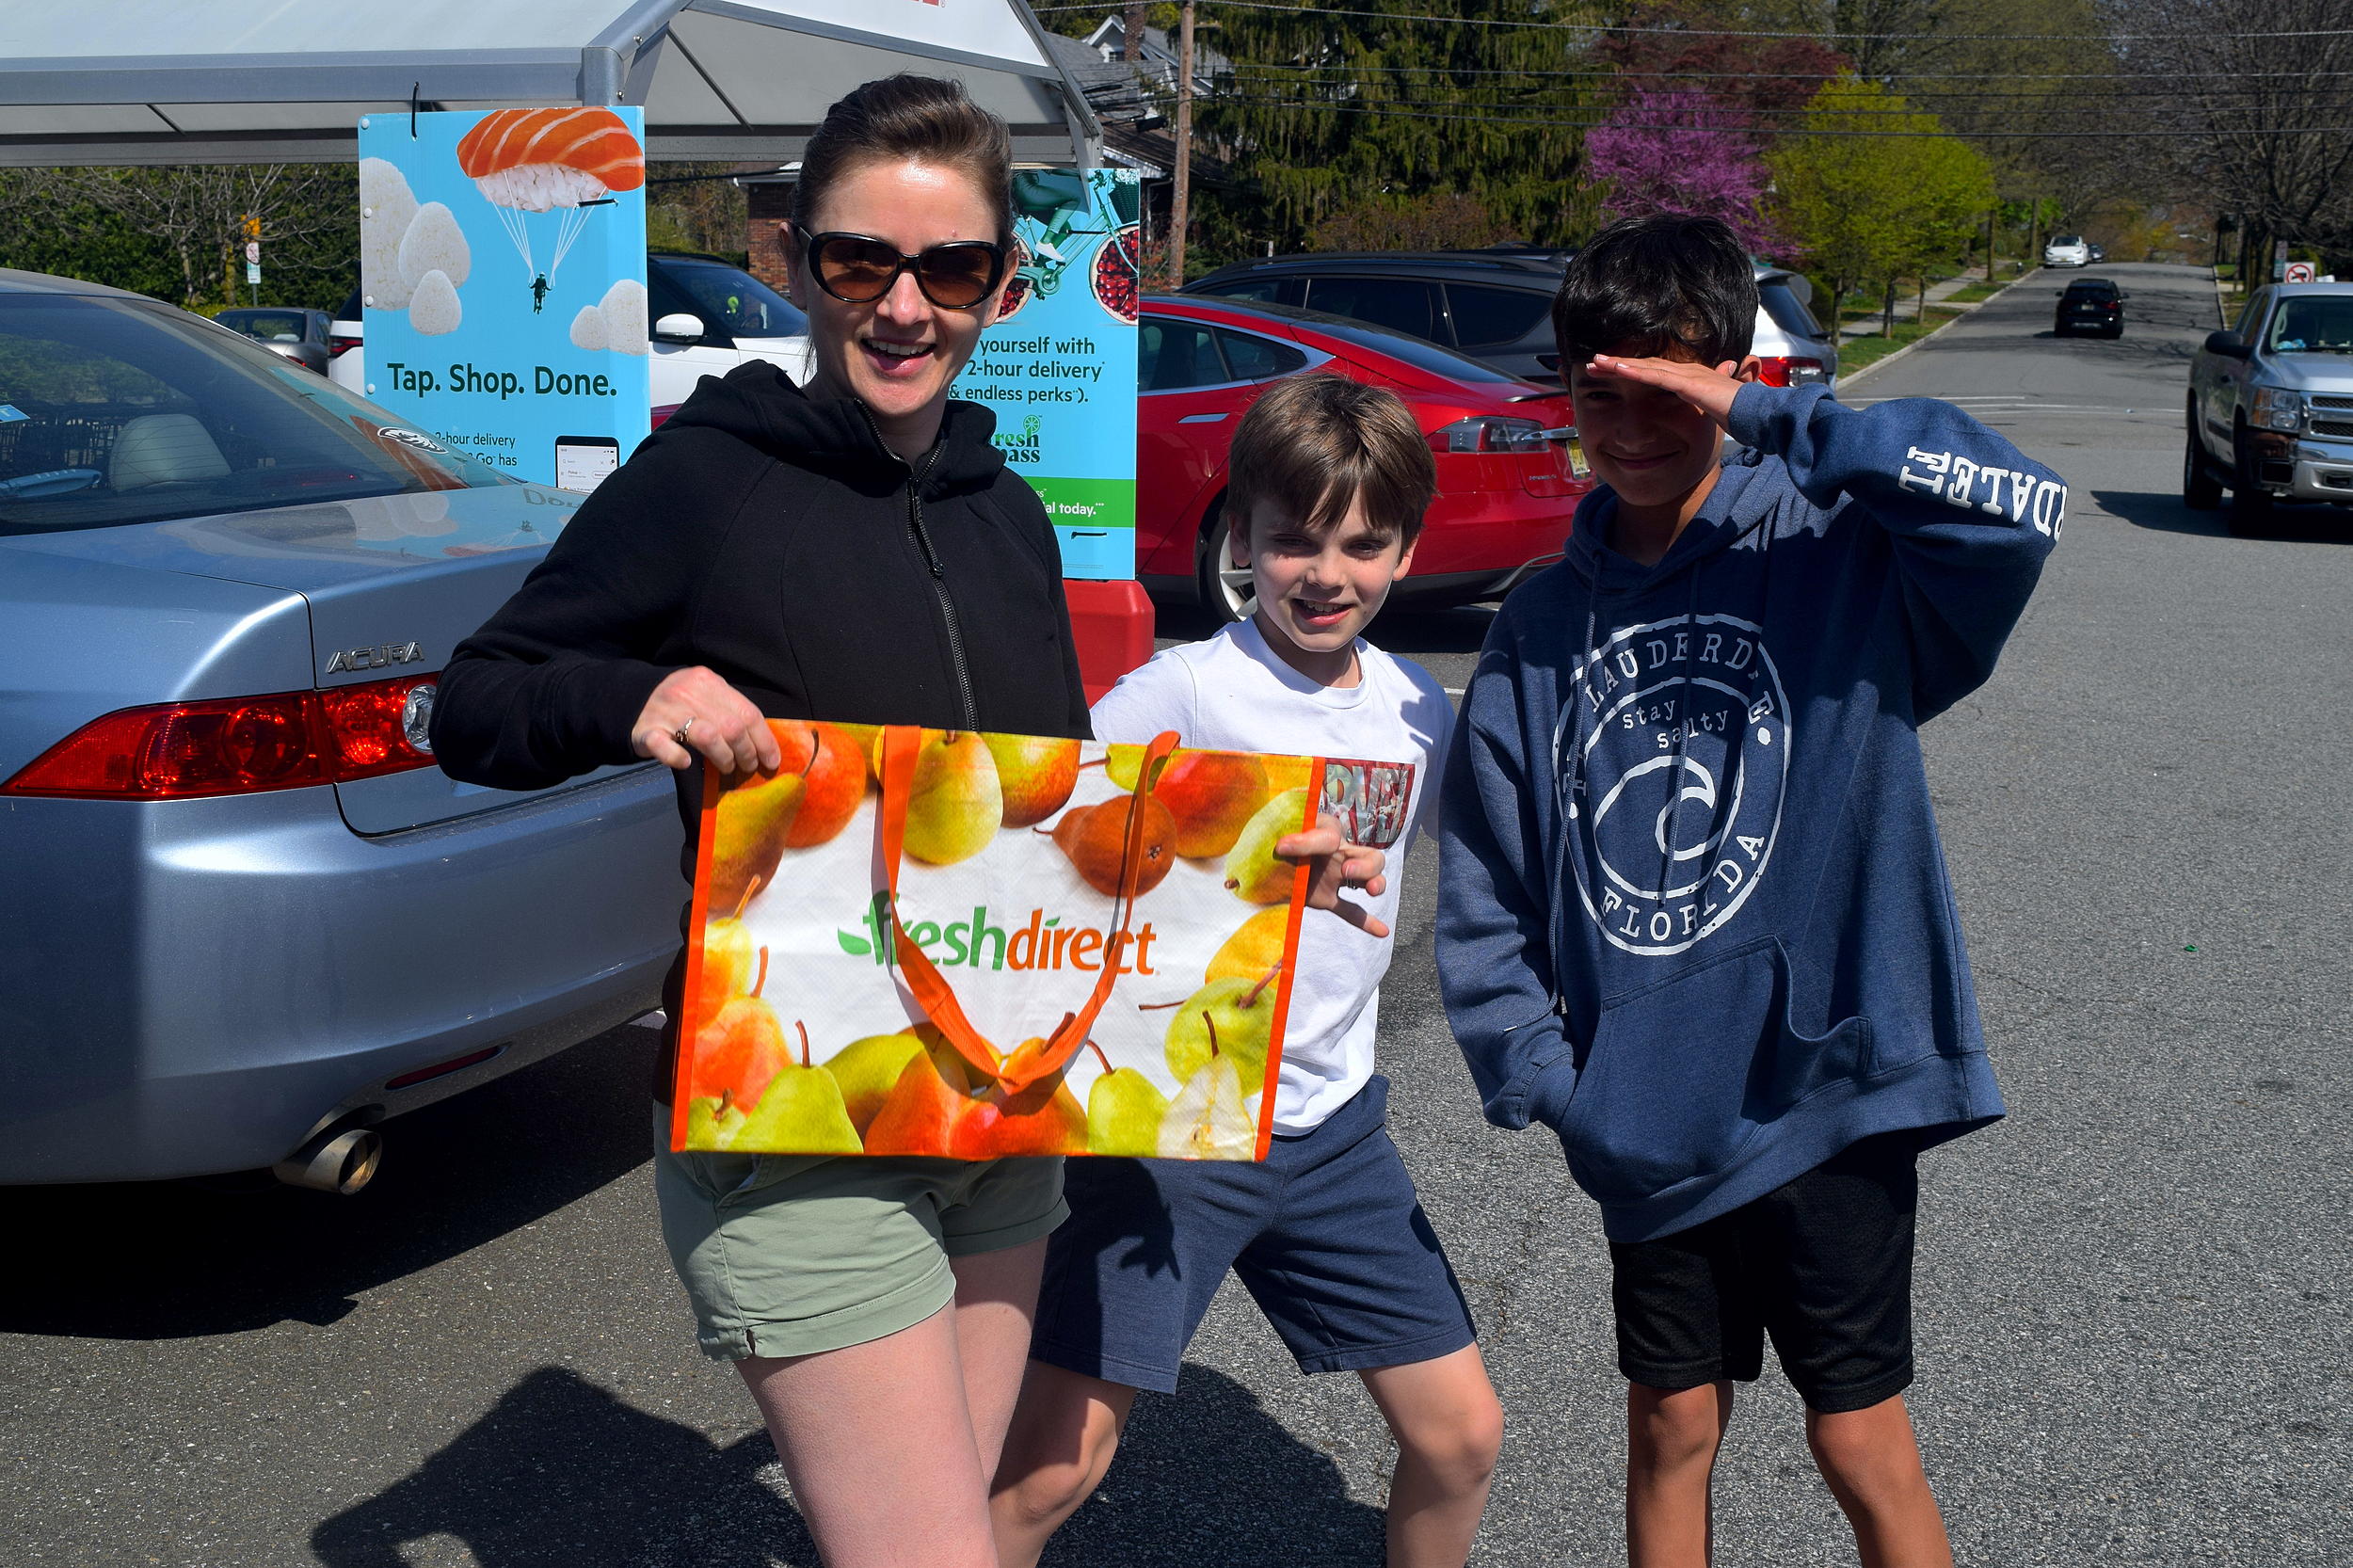 A woman holds a reusable shopping bag in a parking lot, next to two children